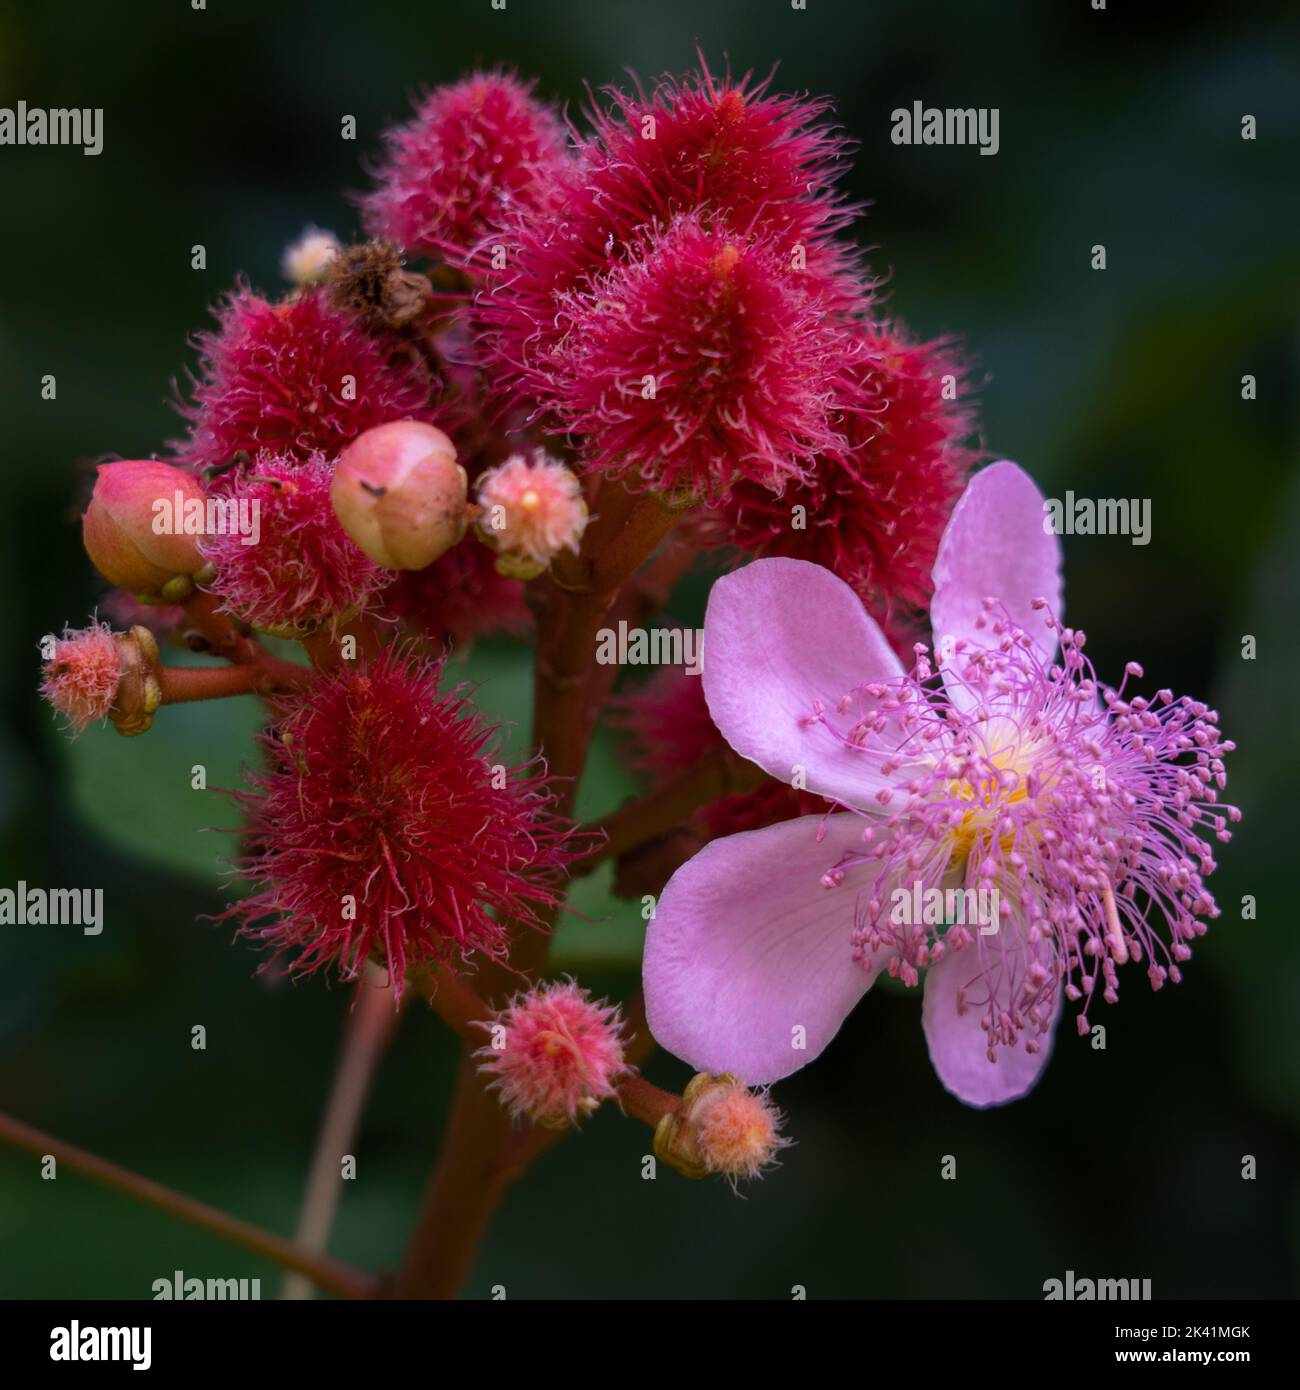 Closeup view of pink achiote or bixa orellana flowers and young red fruits on dark natural background Stock Photo